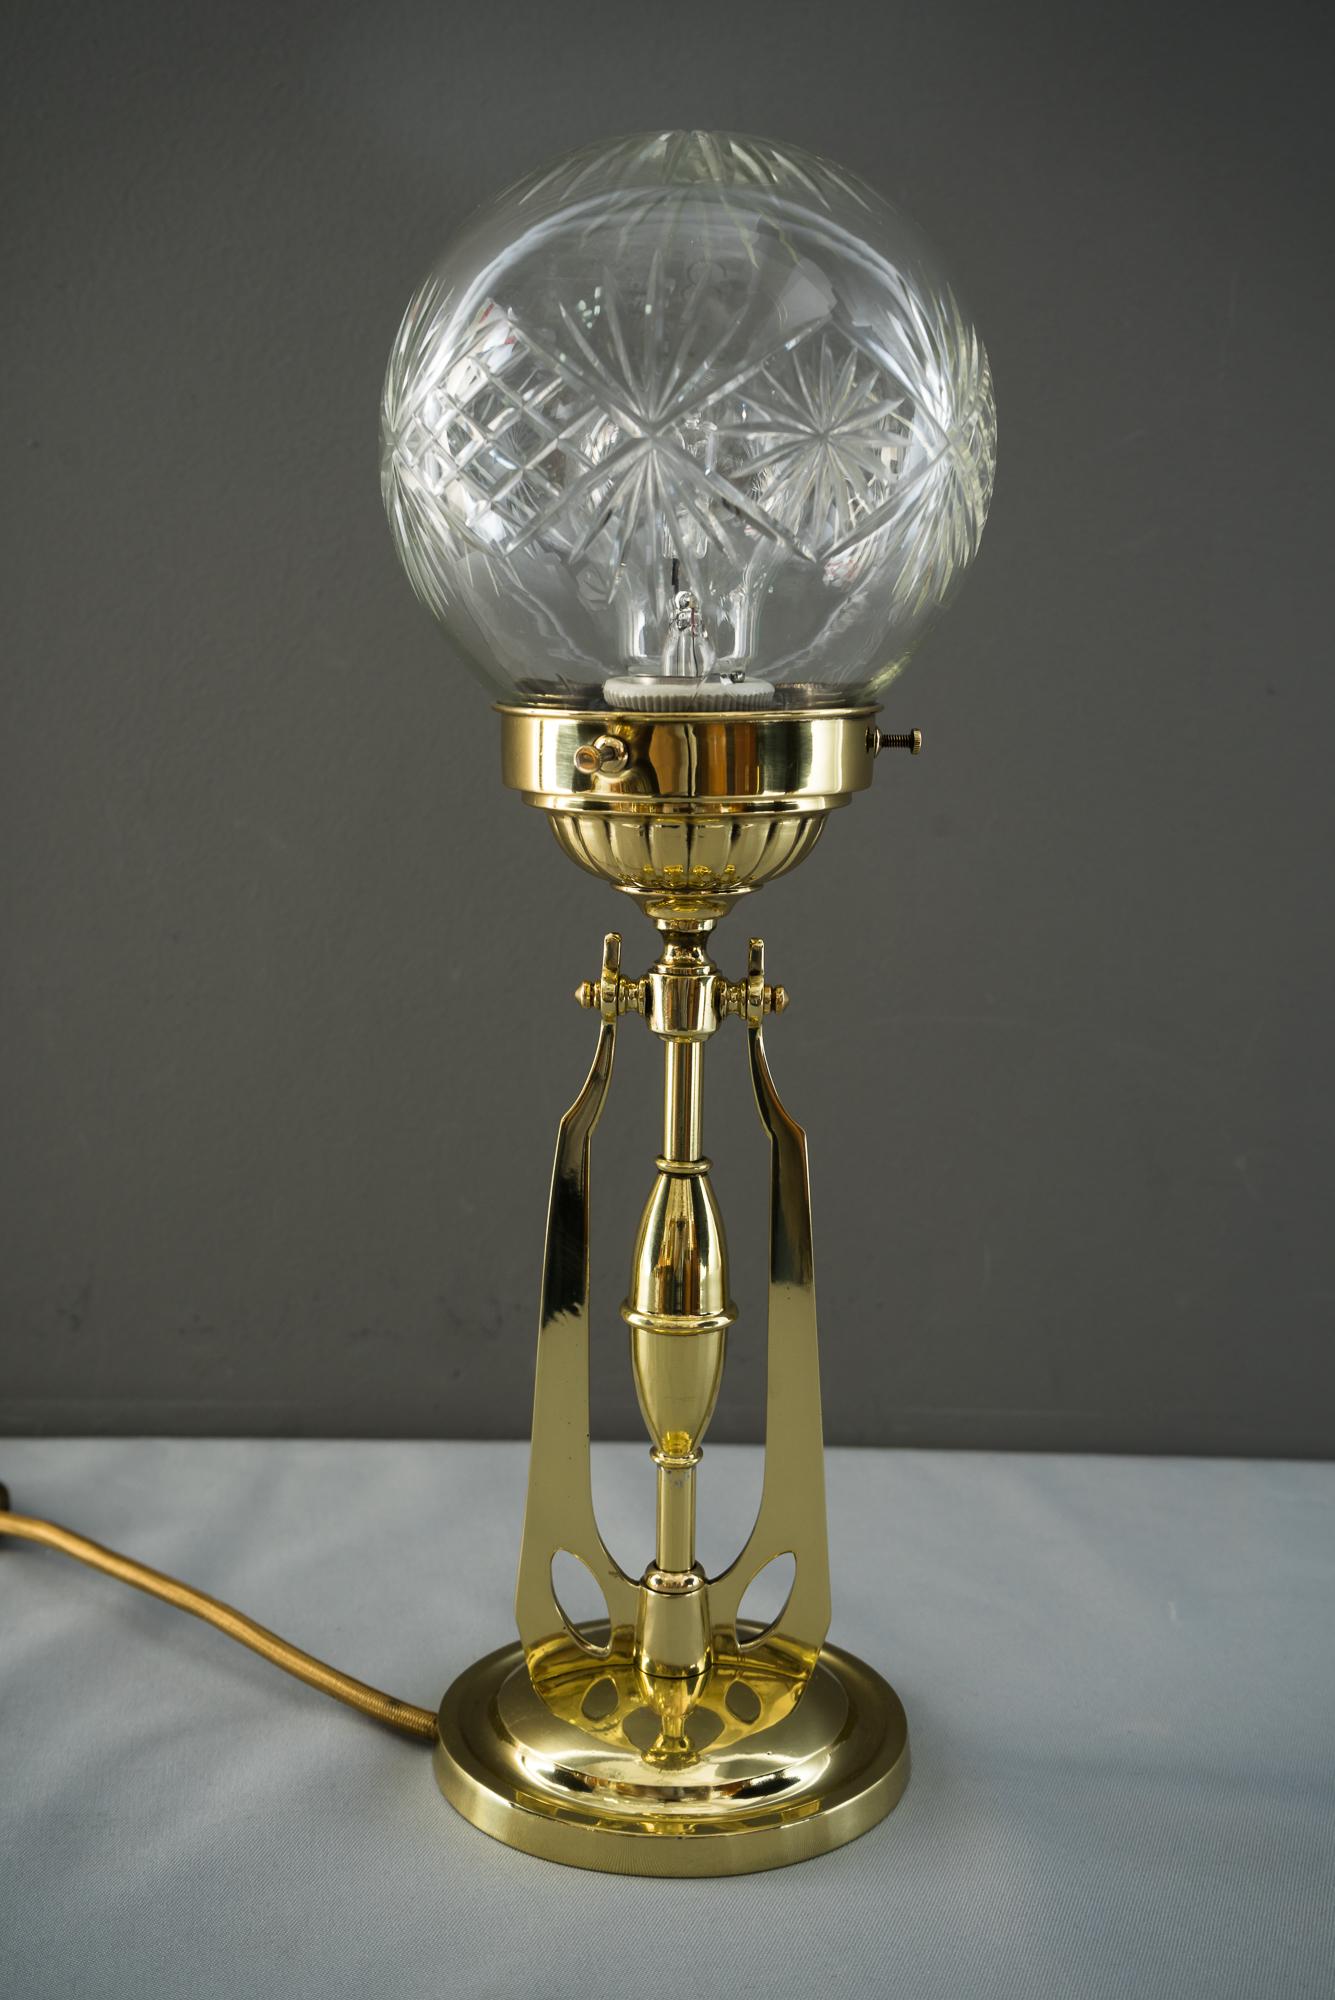 Early 20th Century Art Deco Table Lamp circa 1918 with Original Cut-Glass